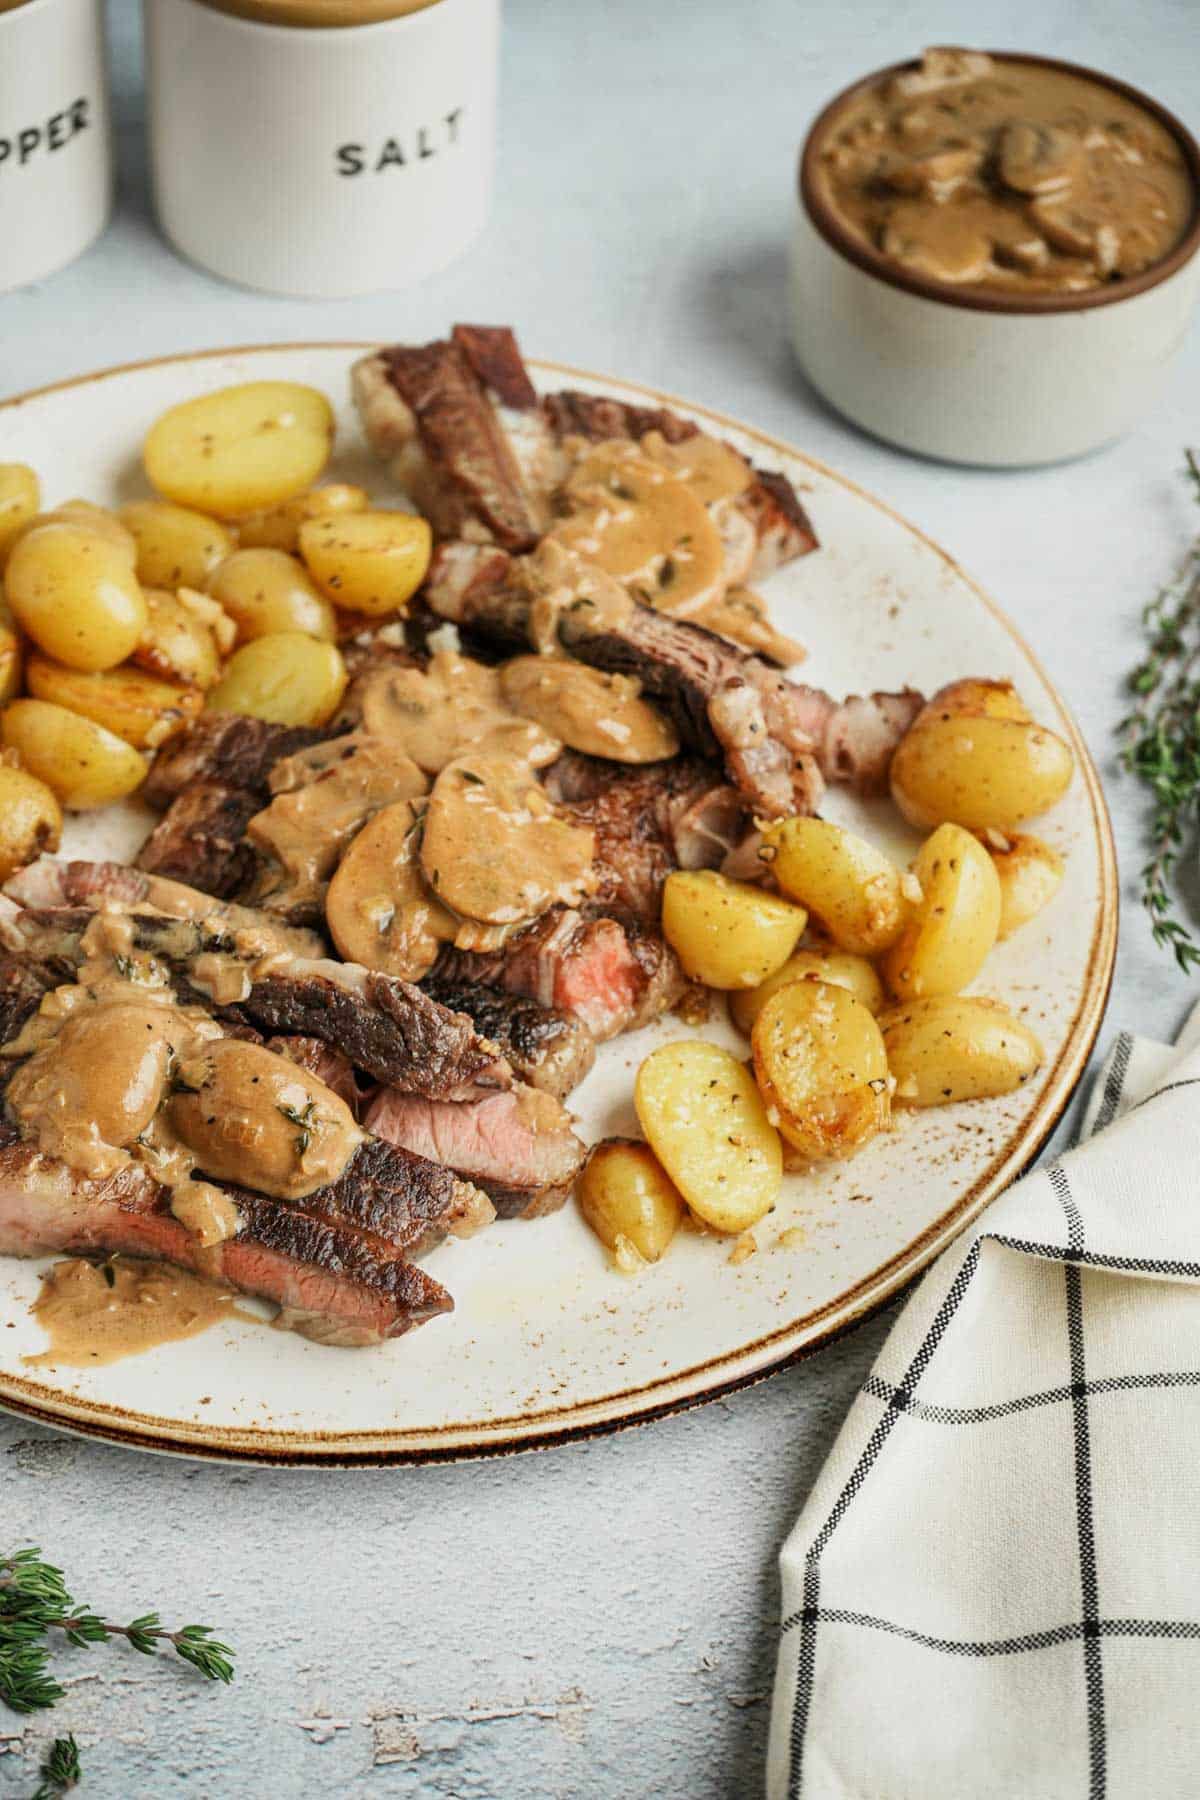 a plate of steak and potatoes smothered in brown mushroom gravy